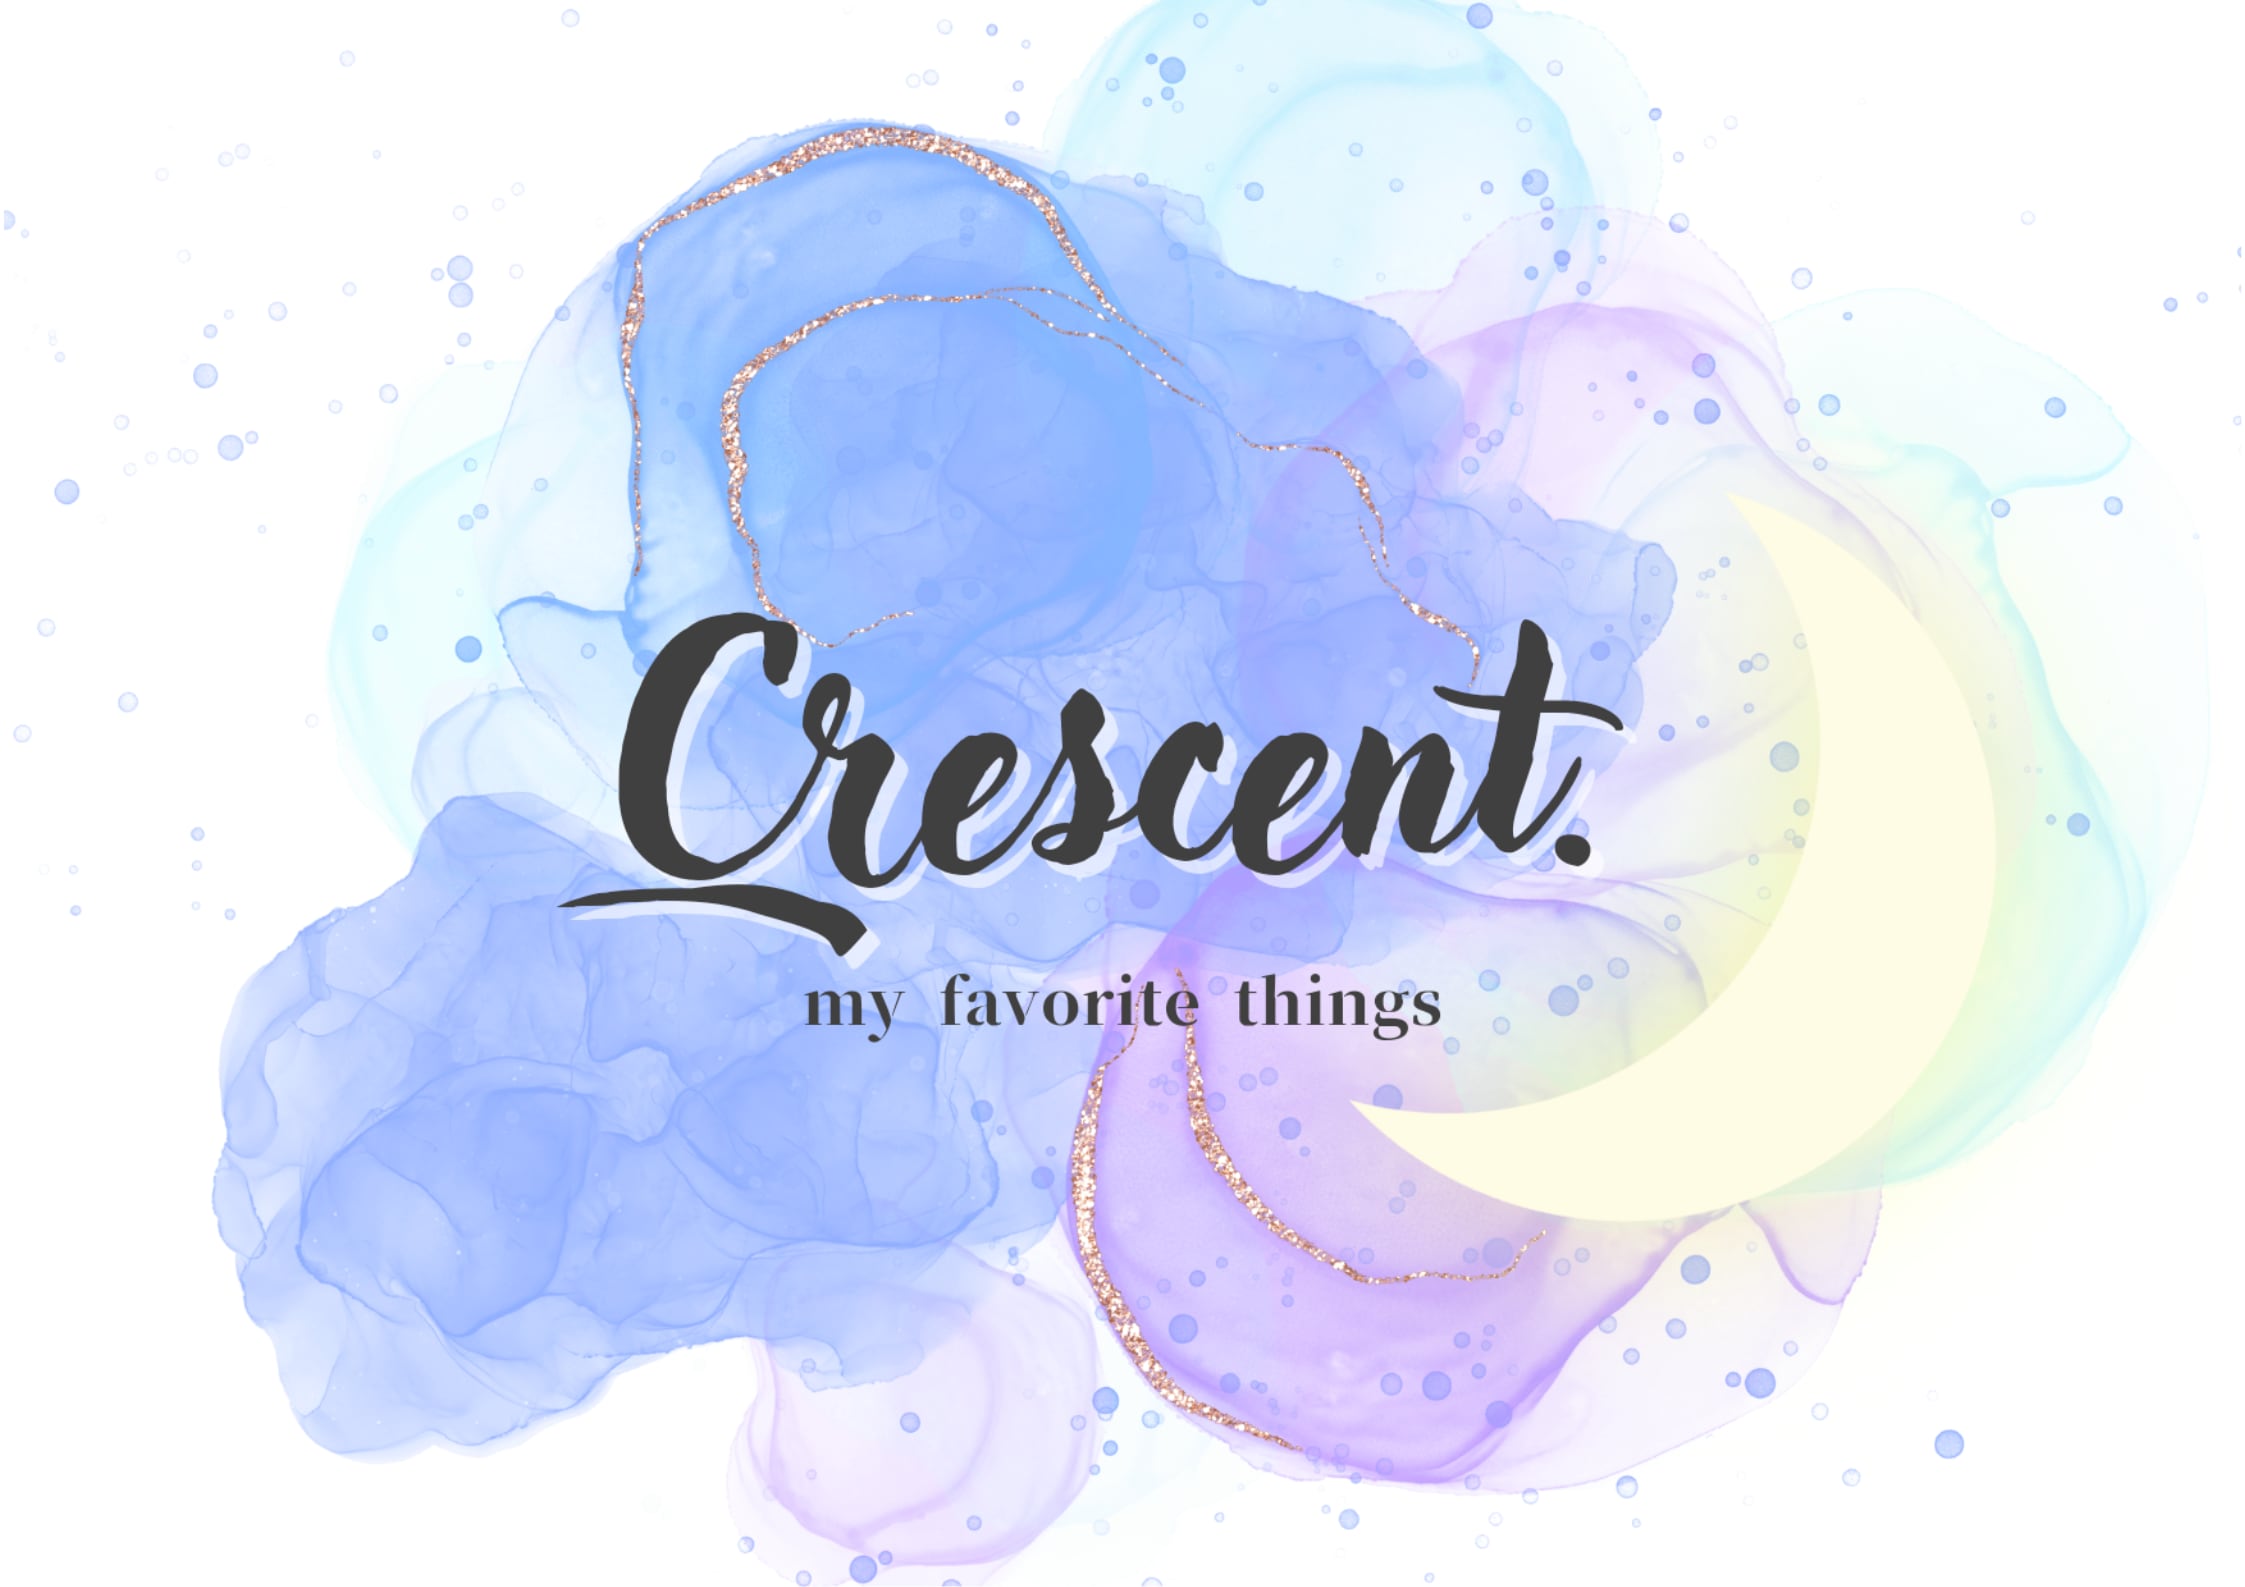 Crescent. -my favorite things-